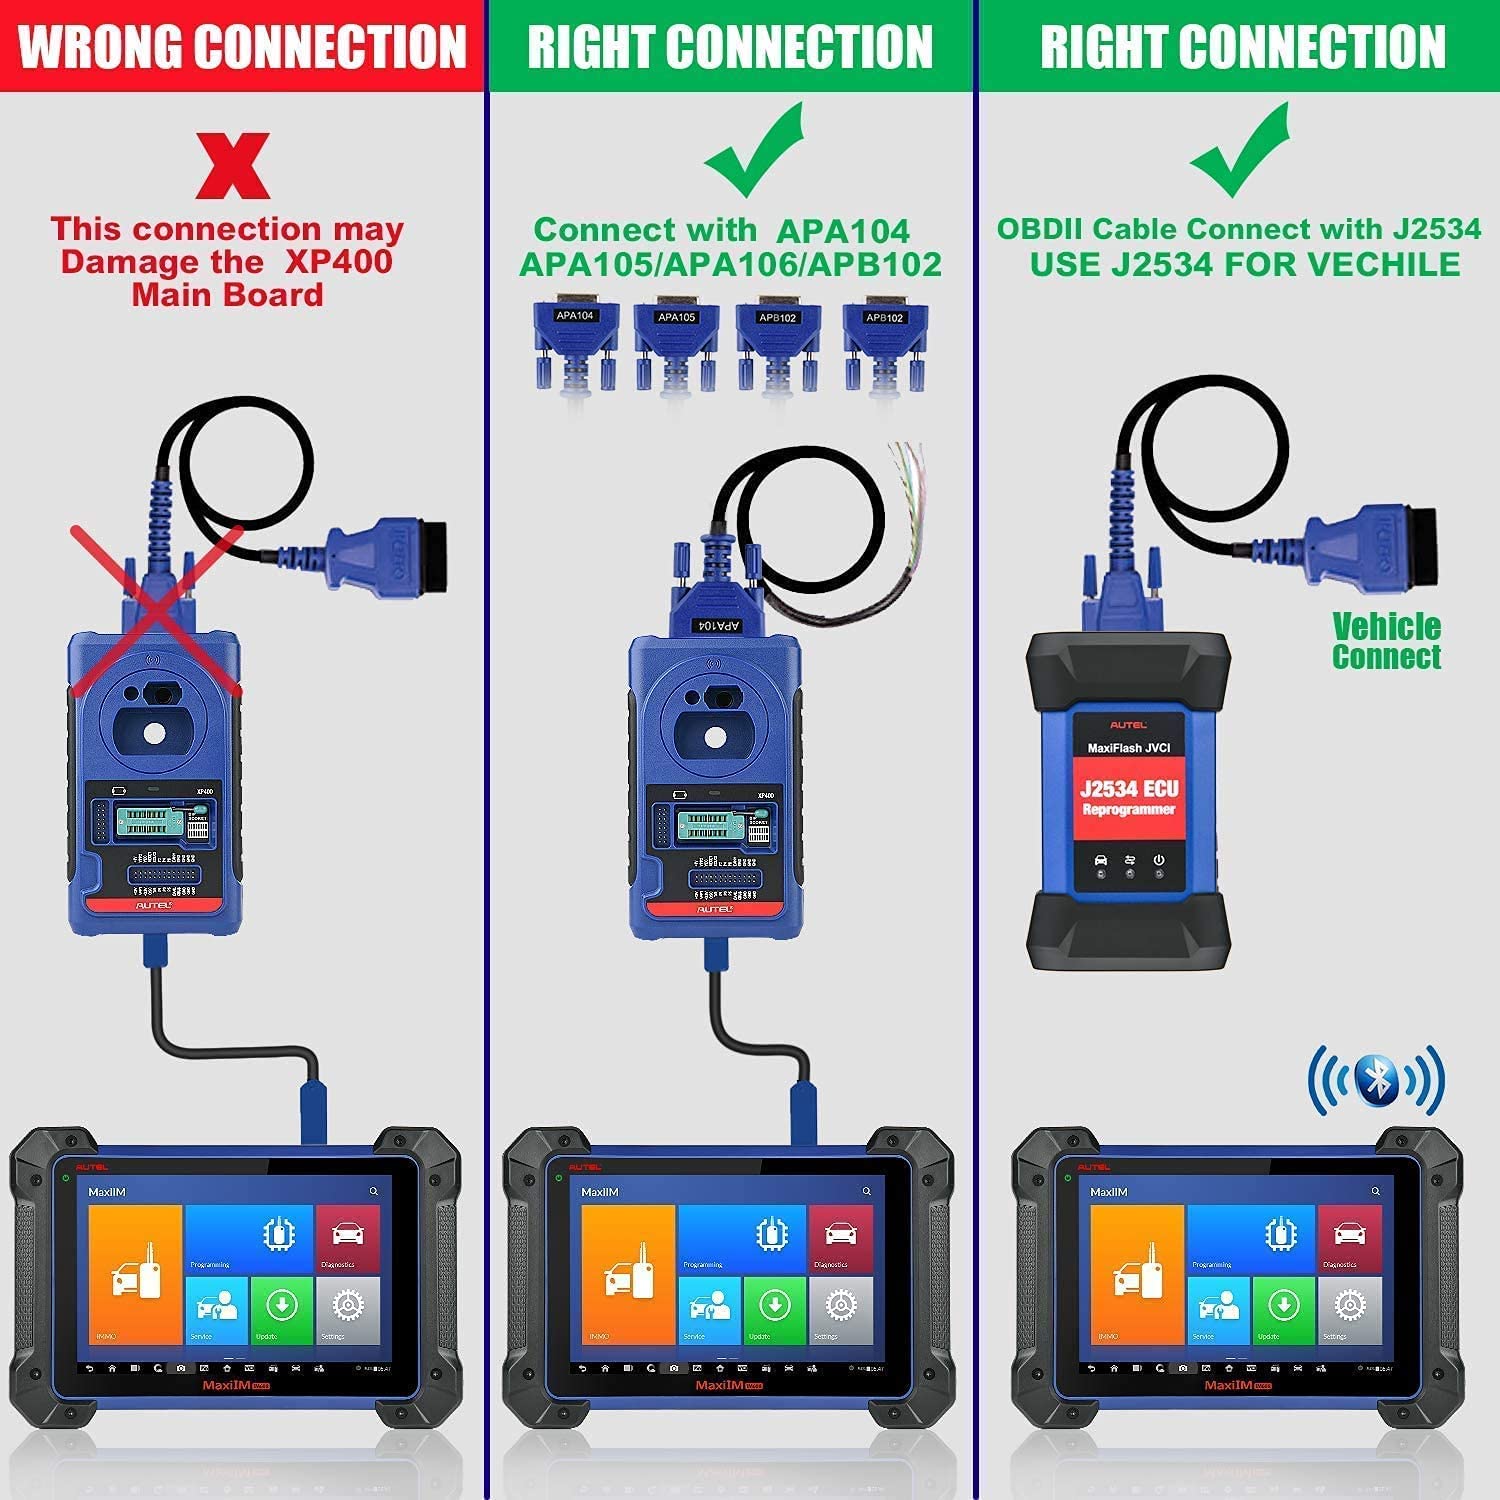 The right connection of Autel MaxiIM IM608 